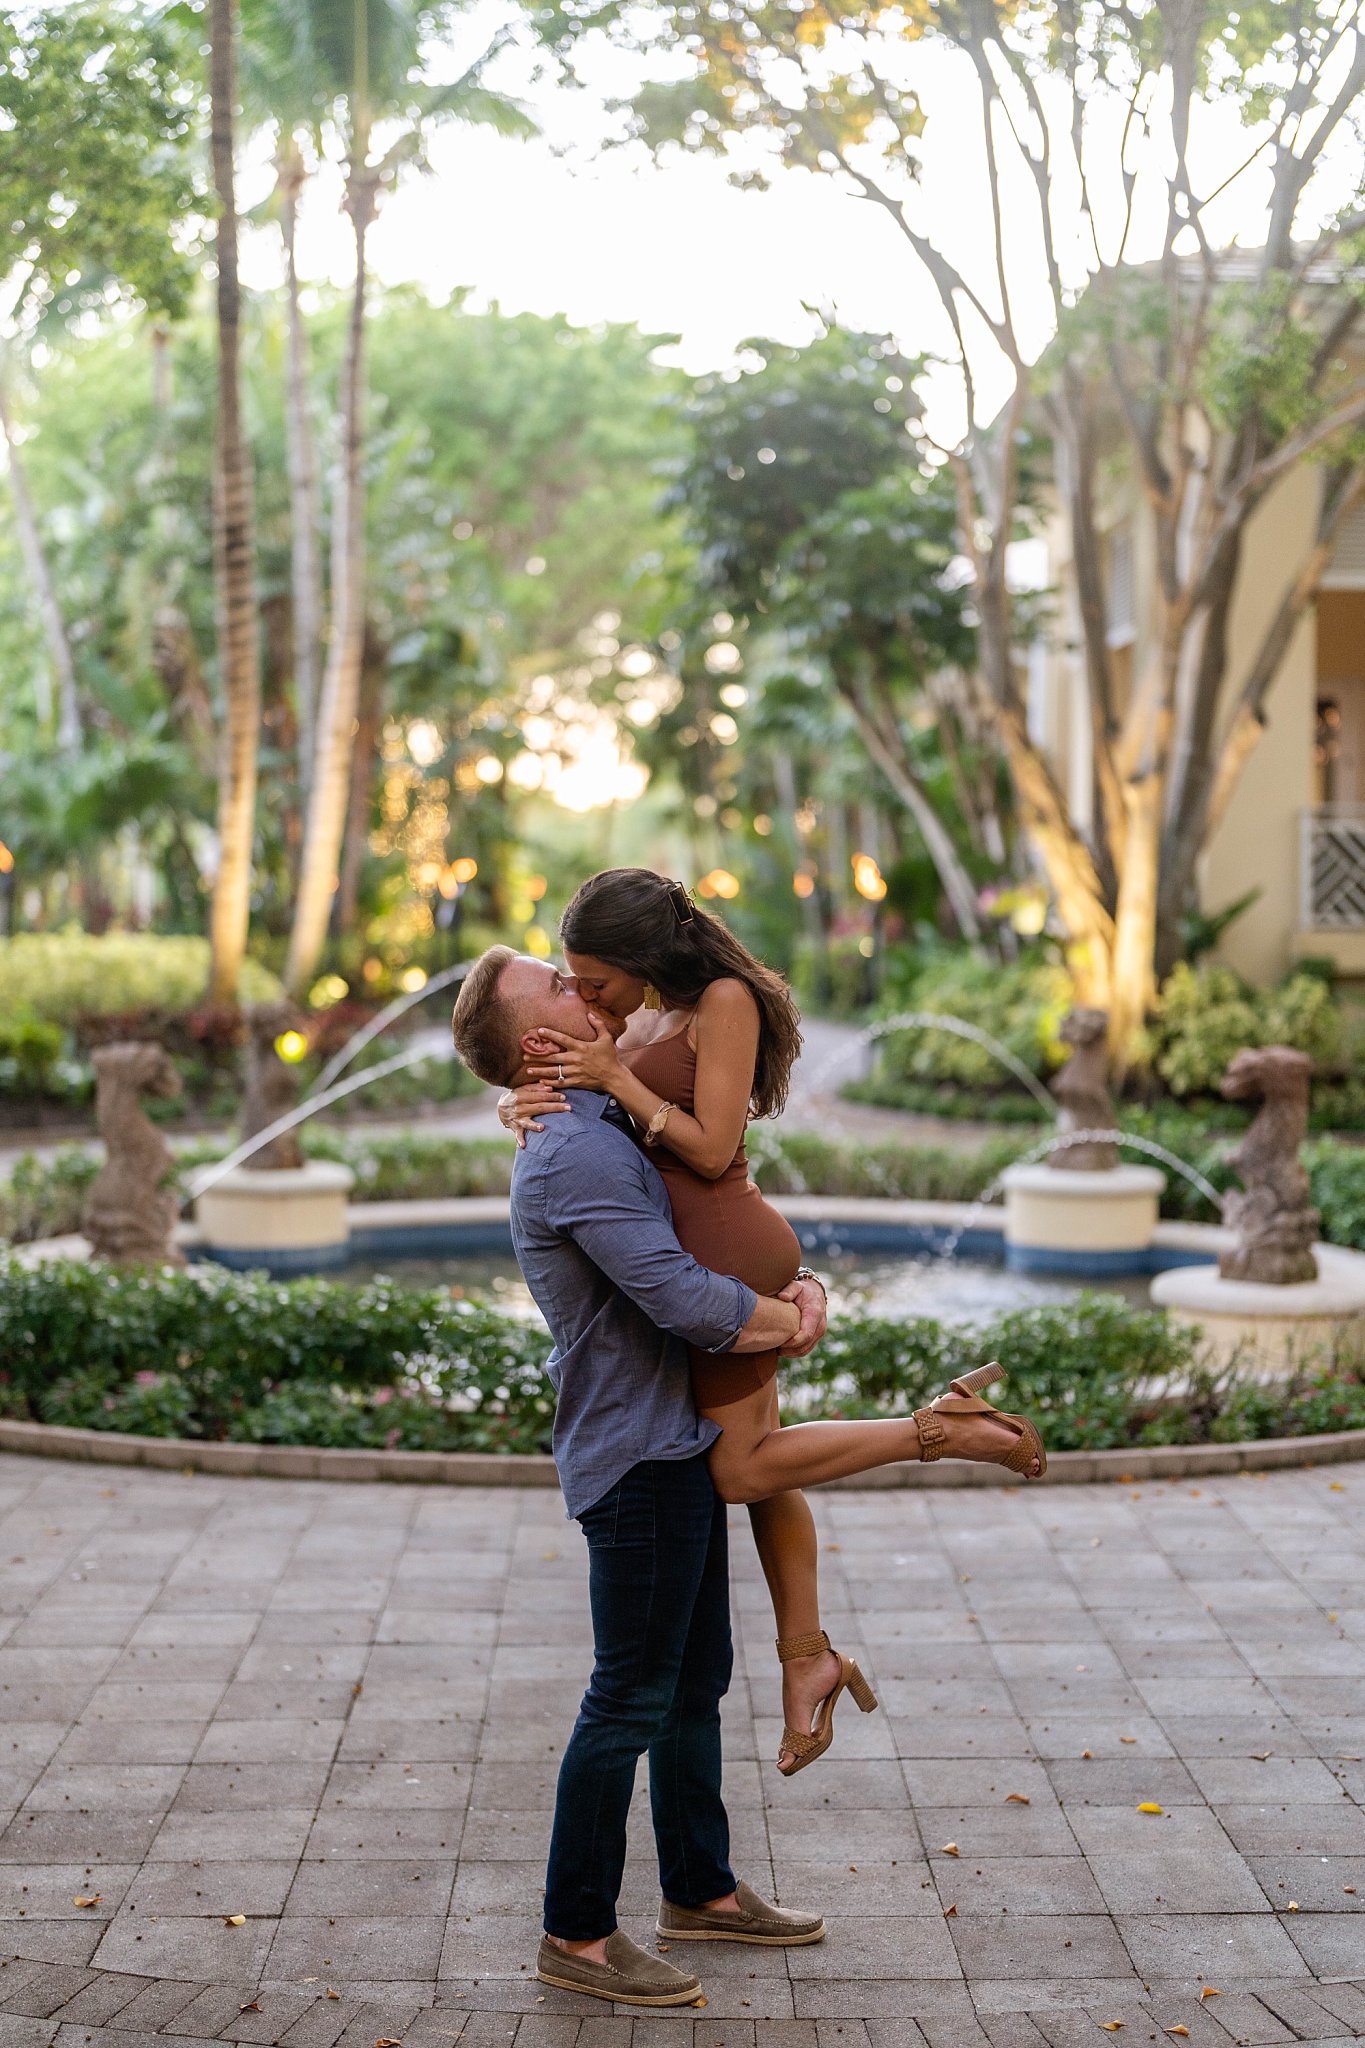 Bonita Springs Florida engagement couple kisses after woman says yes to proposal